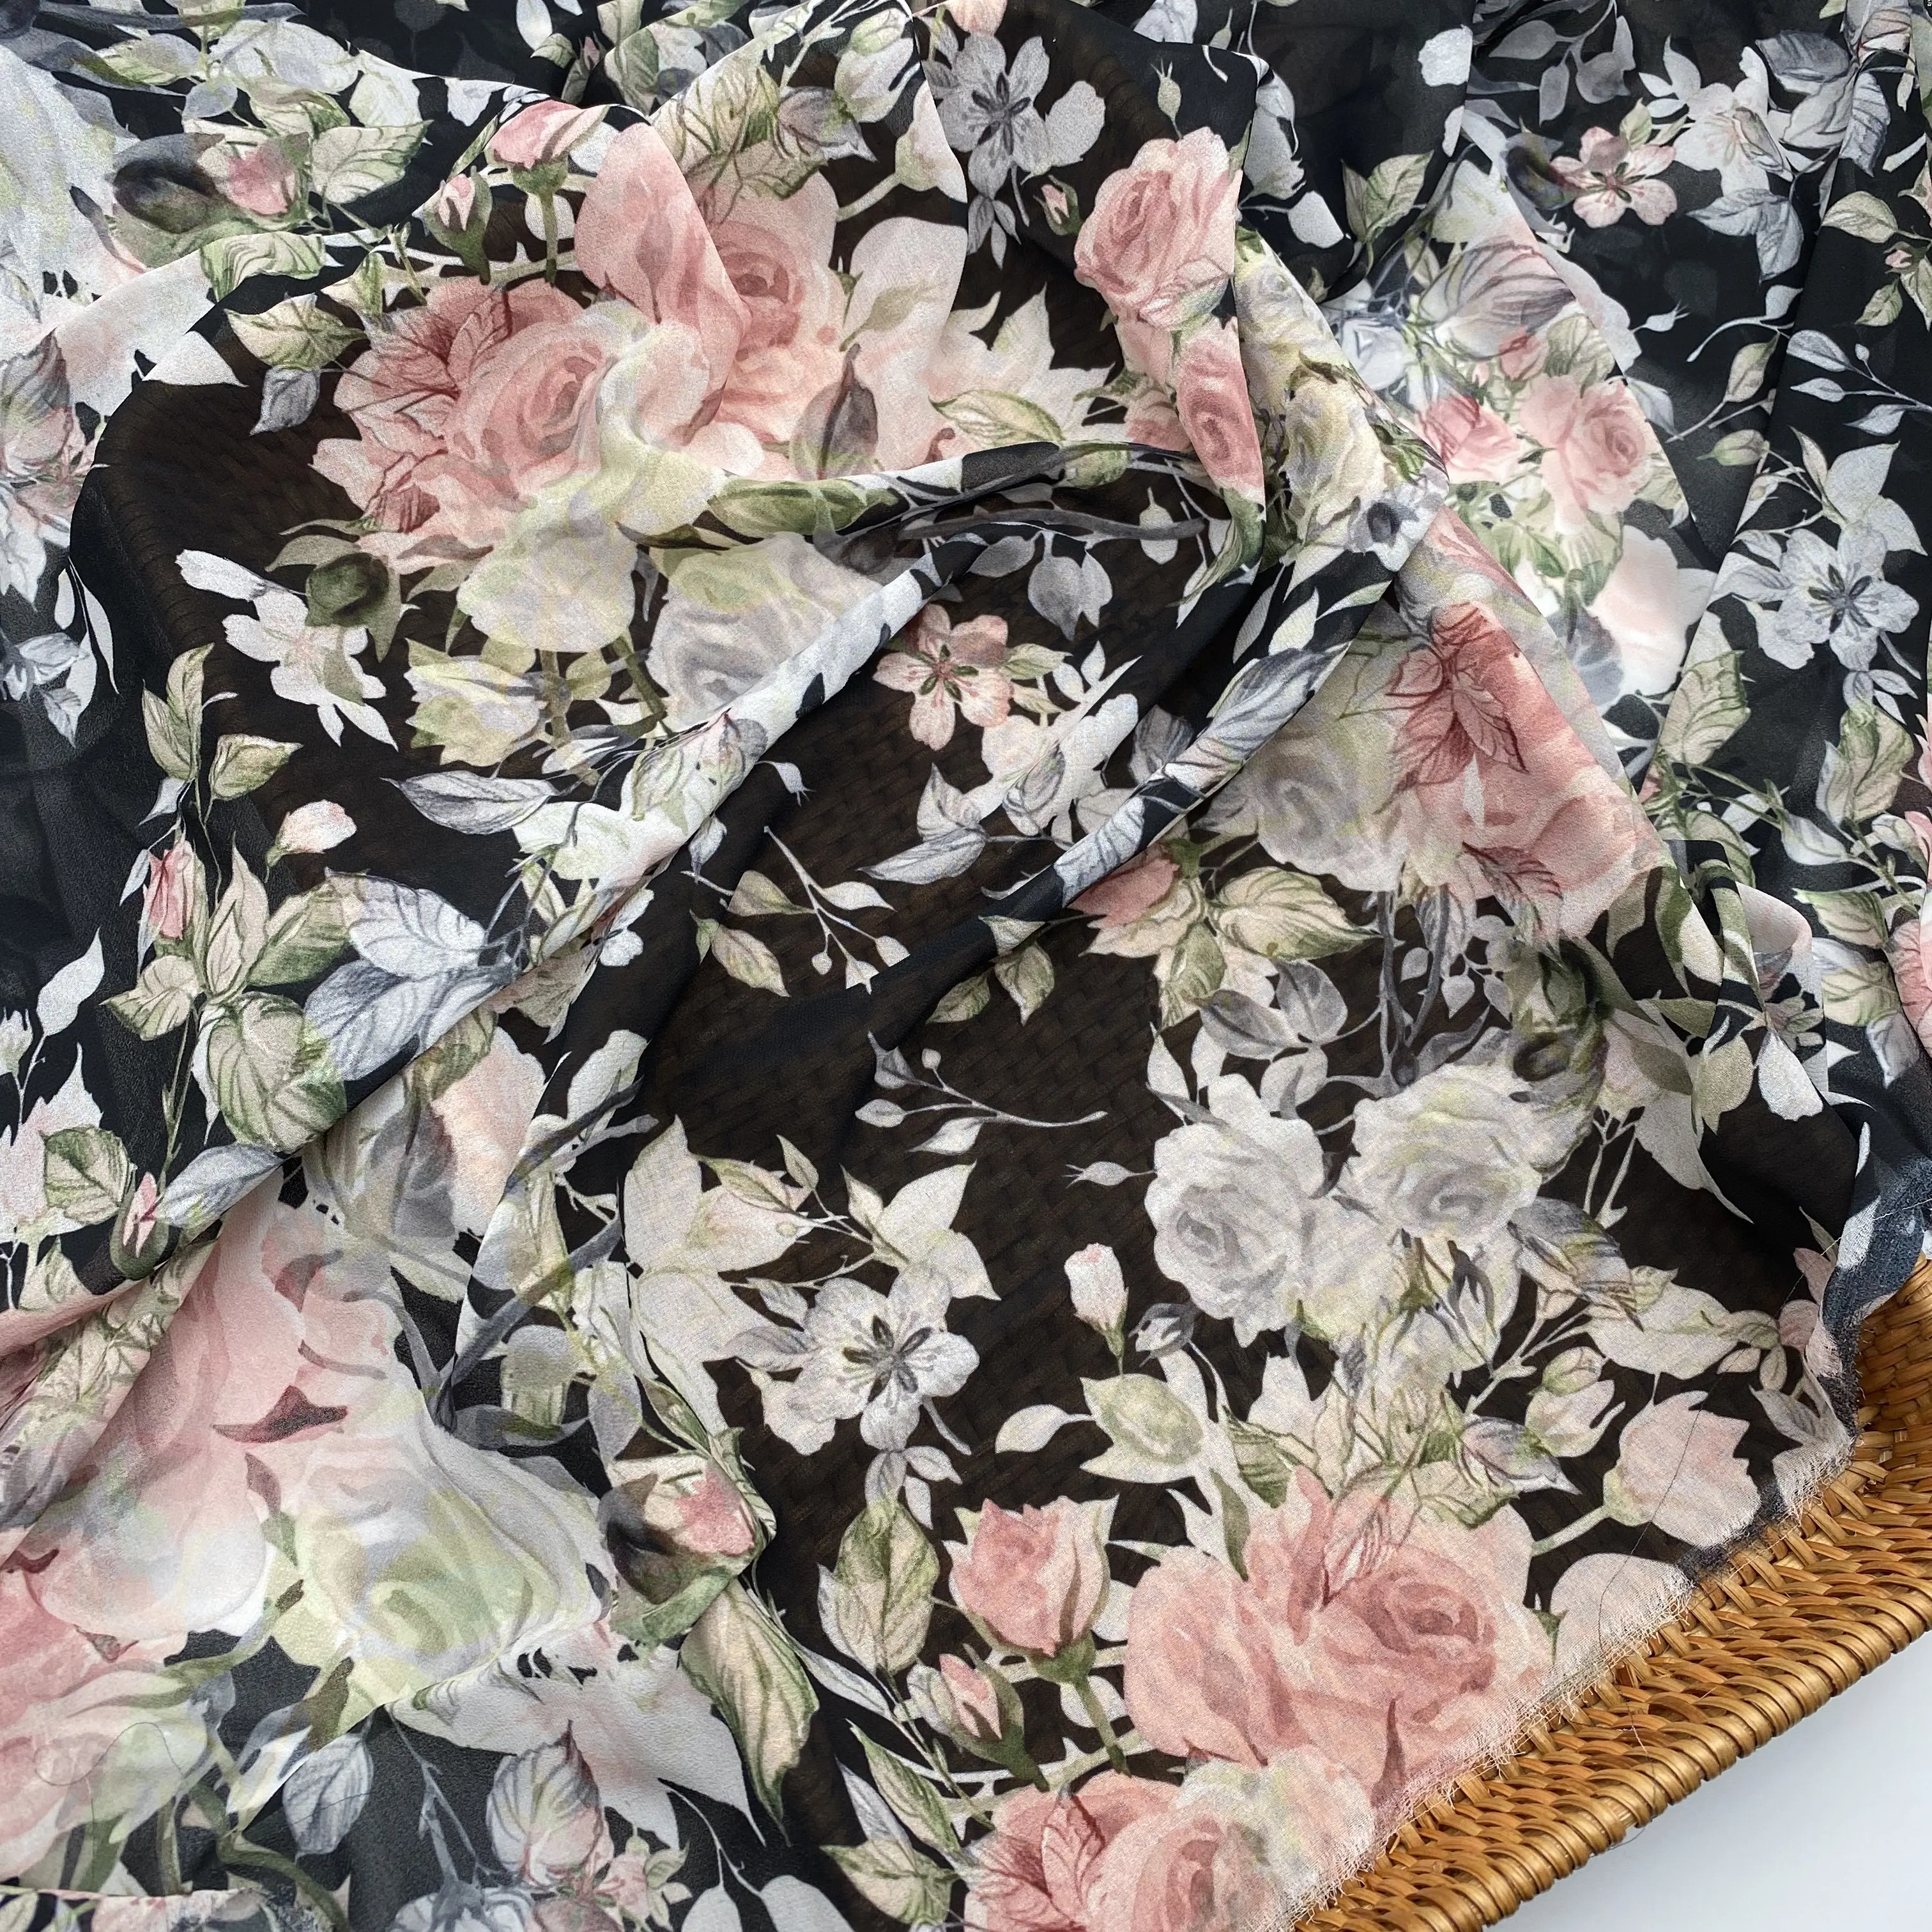 2021 summer fabric floral print fabric 100% Polyester Pearl Chiffon Fabric For Lady dress and clothing